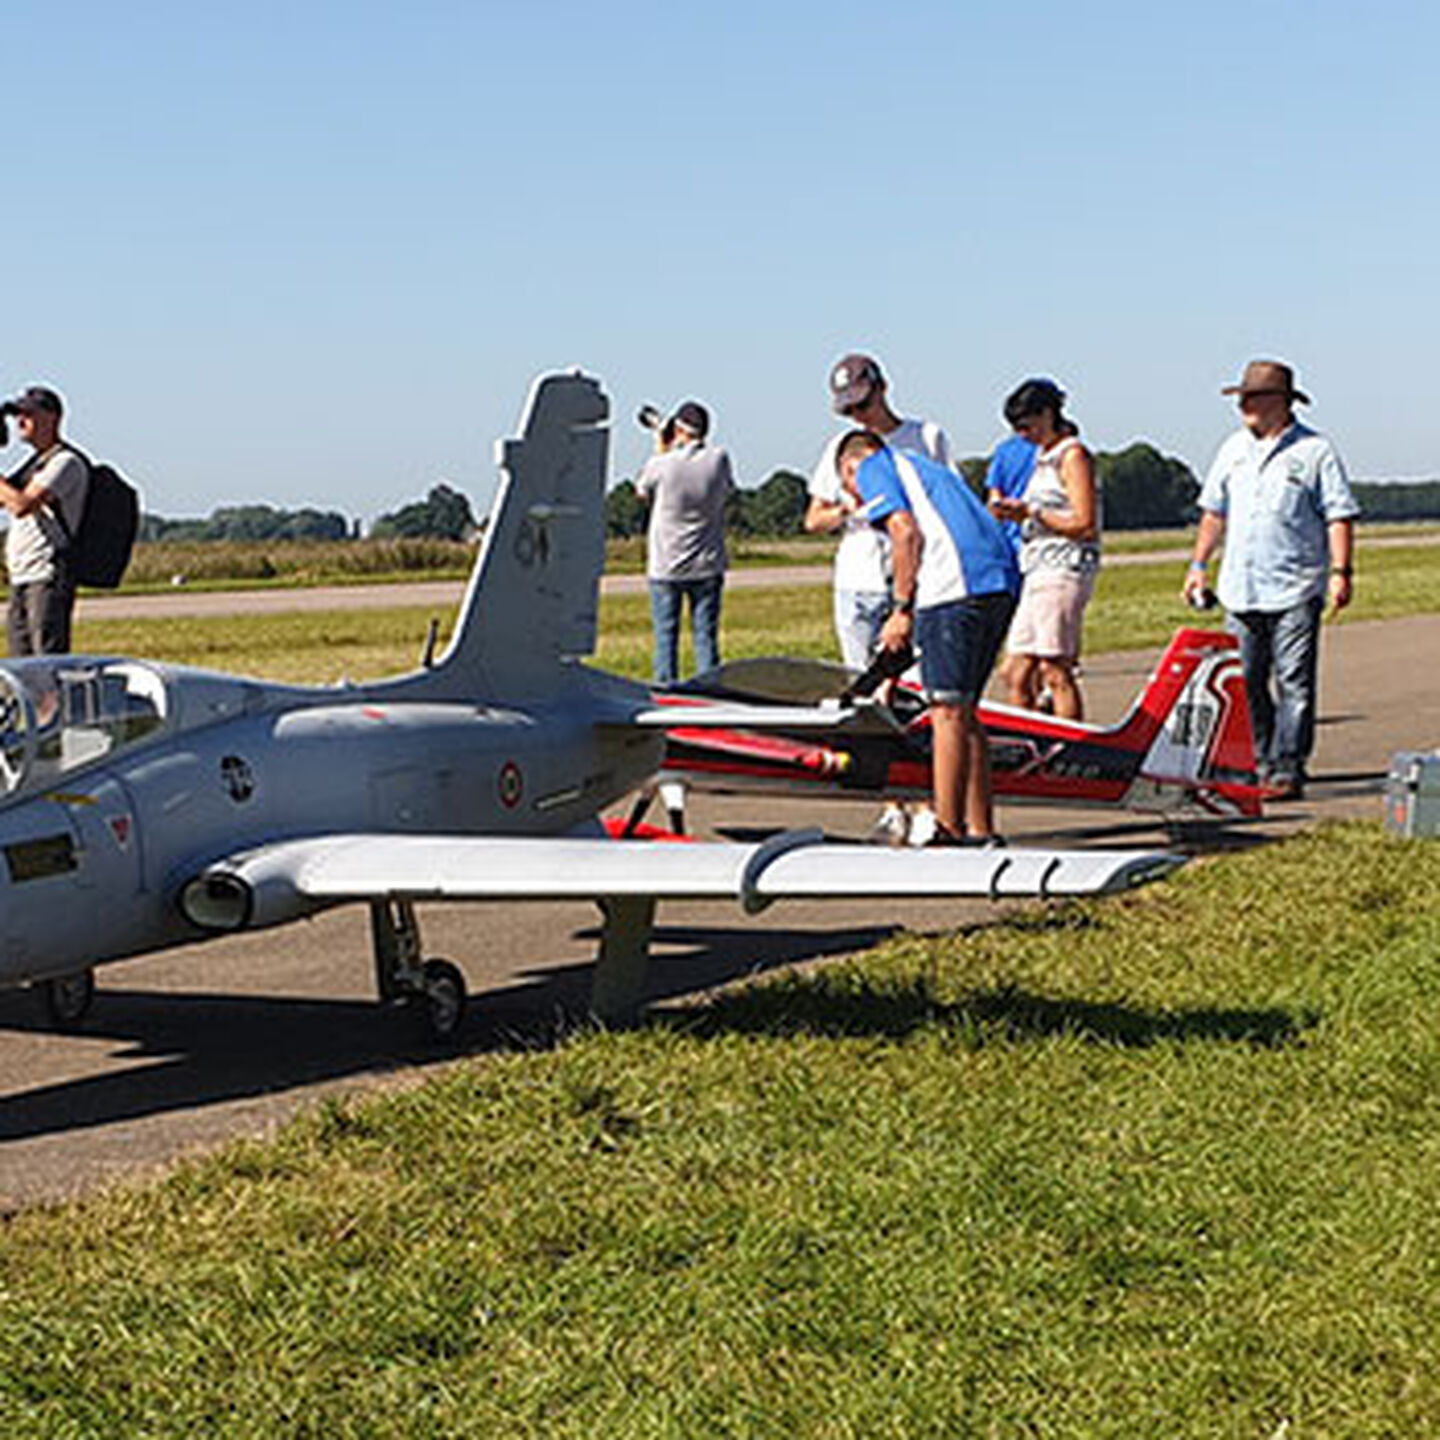 Find a local RC airfield near me for RC airshows and events